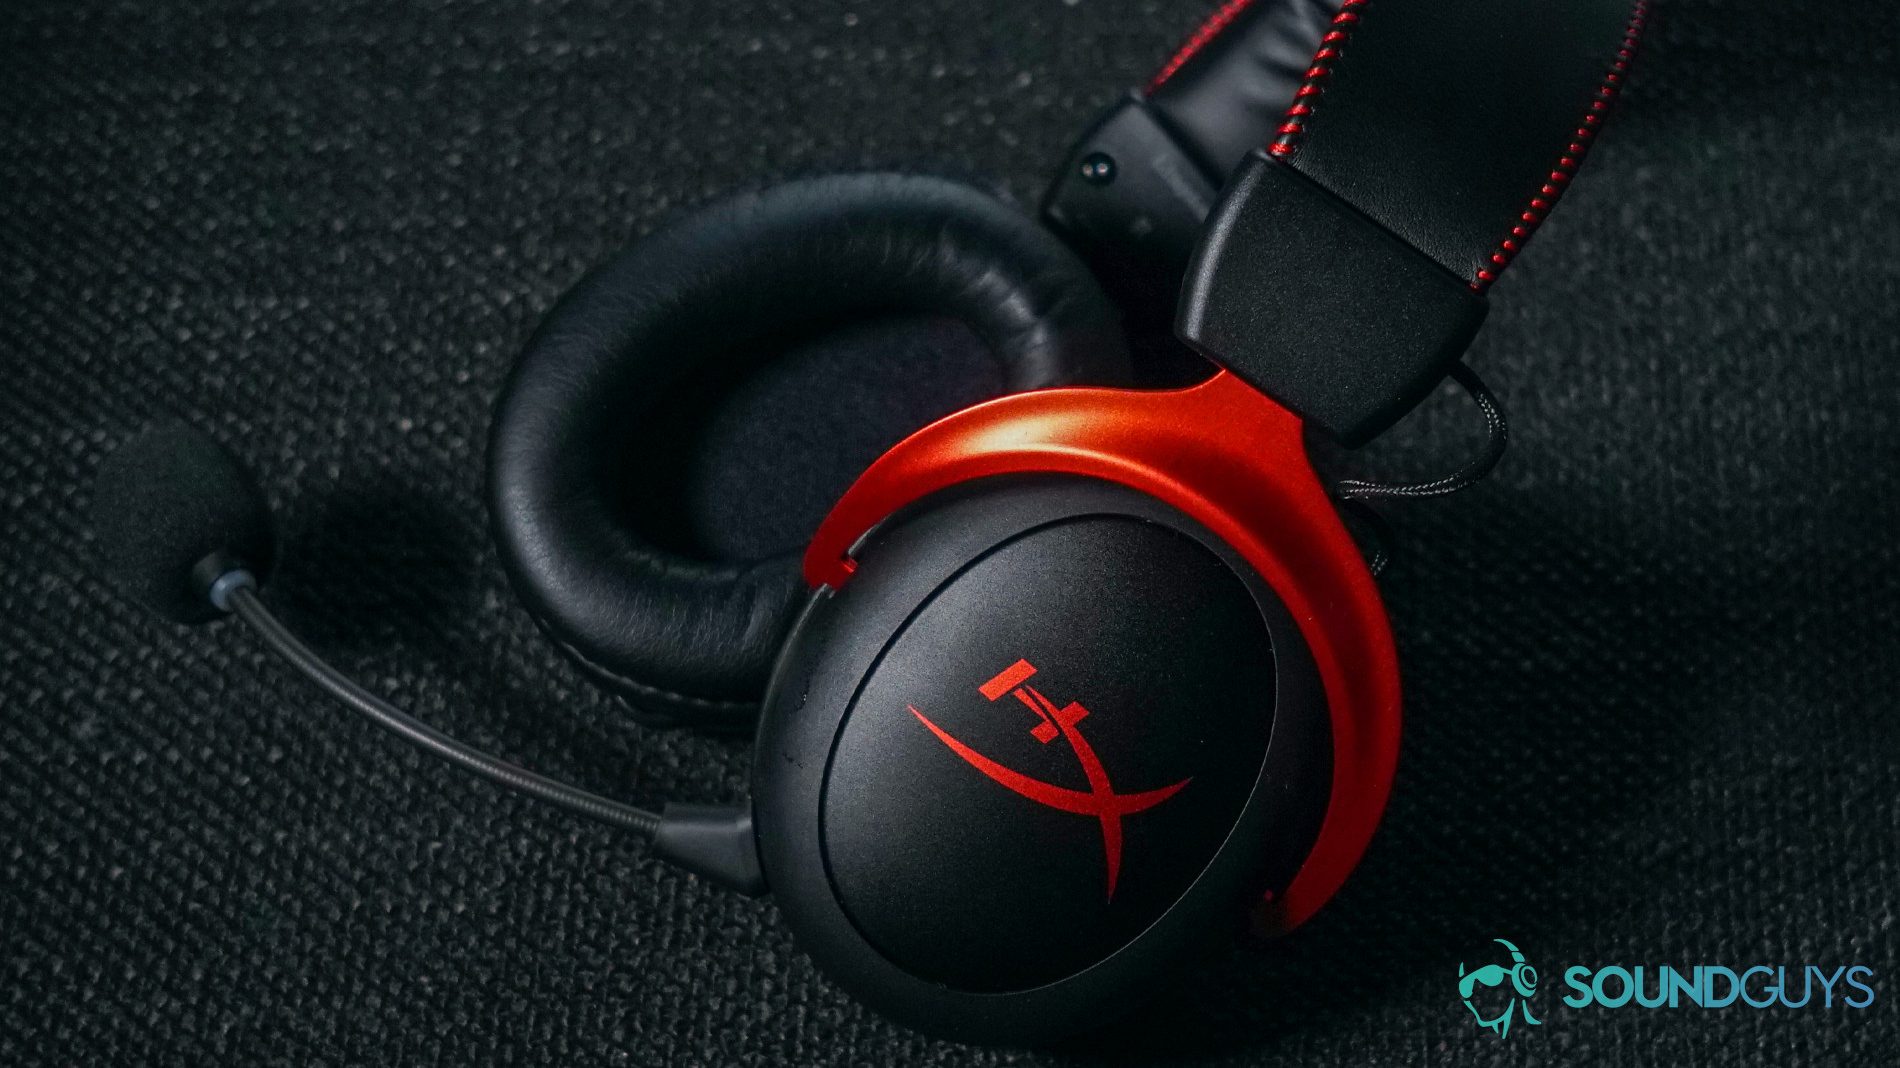 The HyperX Cloud II Wireless gaming headset lays on a fabric surface.